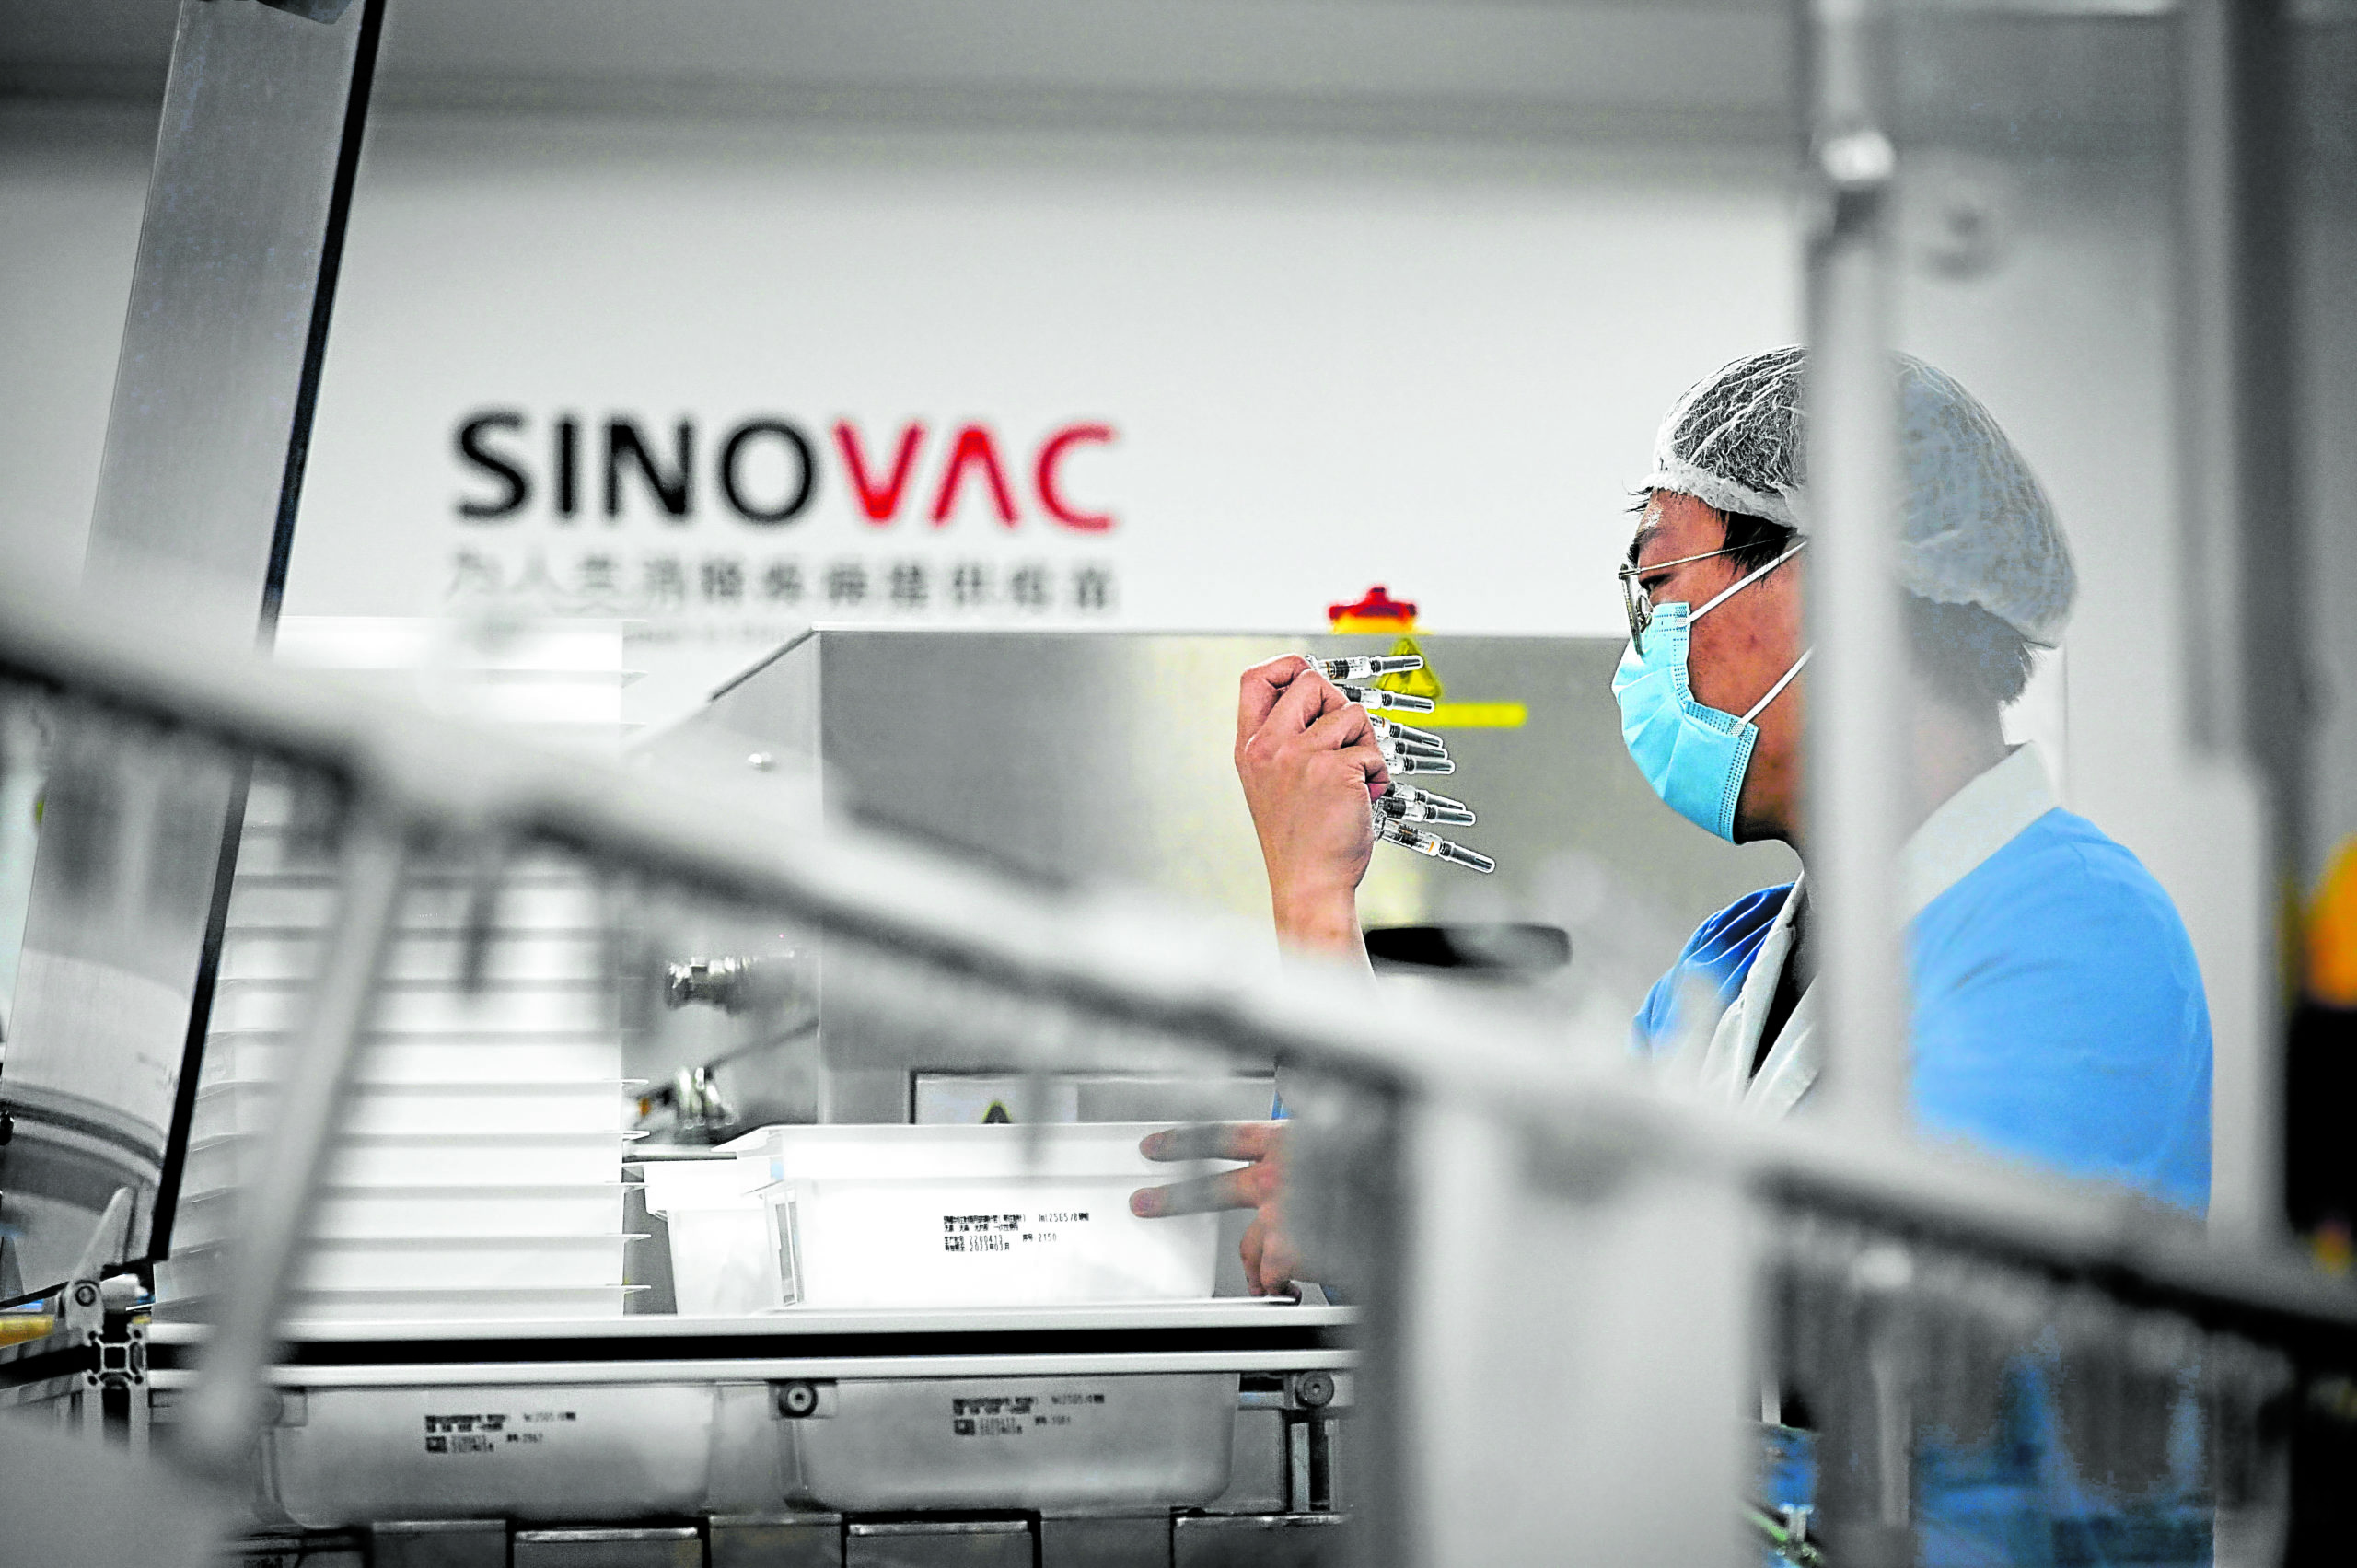 DOH, NTF: Allocation, rollout of Sinovac vaccines ‘still being evaluated’